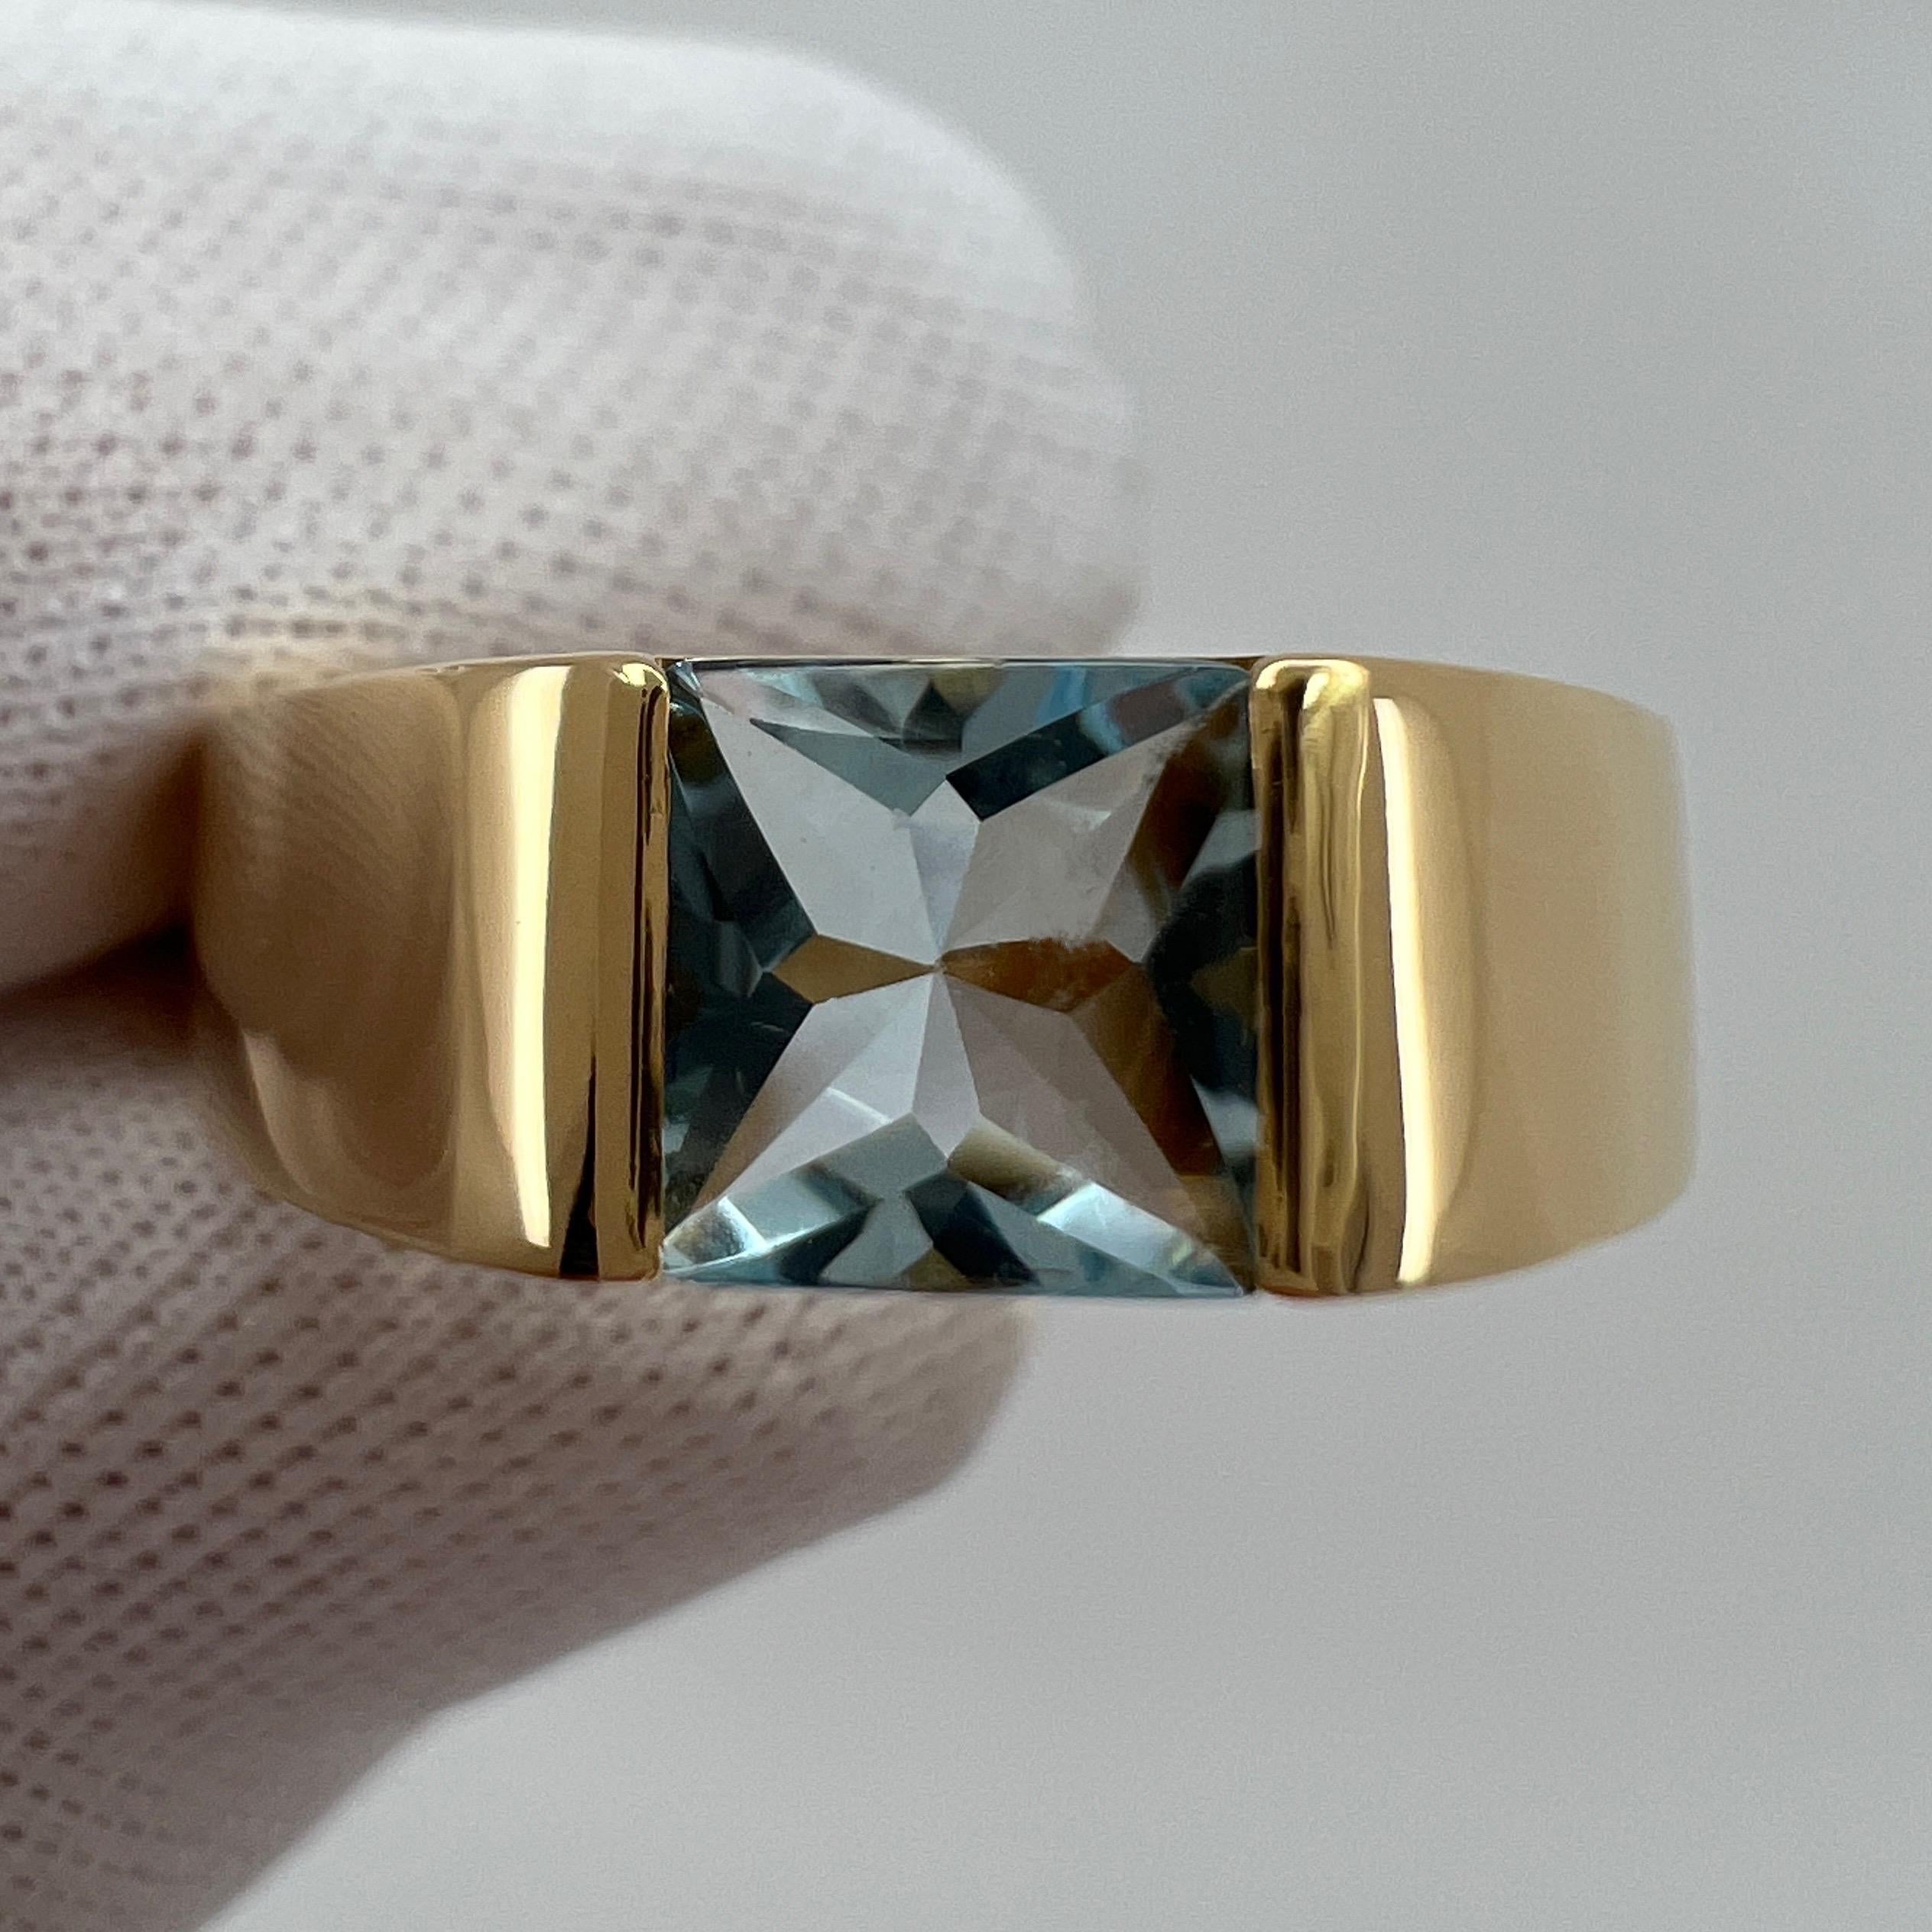 Vintage Cartier Fine Blue Aquamarine 18 Karat Yellow Gold Tank Ring.

Stunning yellow gold ring with a 6mm tension set fine blue aquamarine. 
Fine jewellery houses like Cartier only use the finest of gemstones and this aquamarine is no exception. A